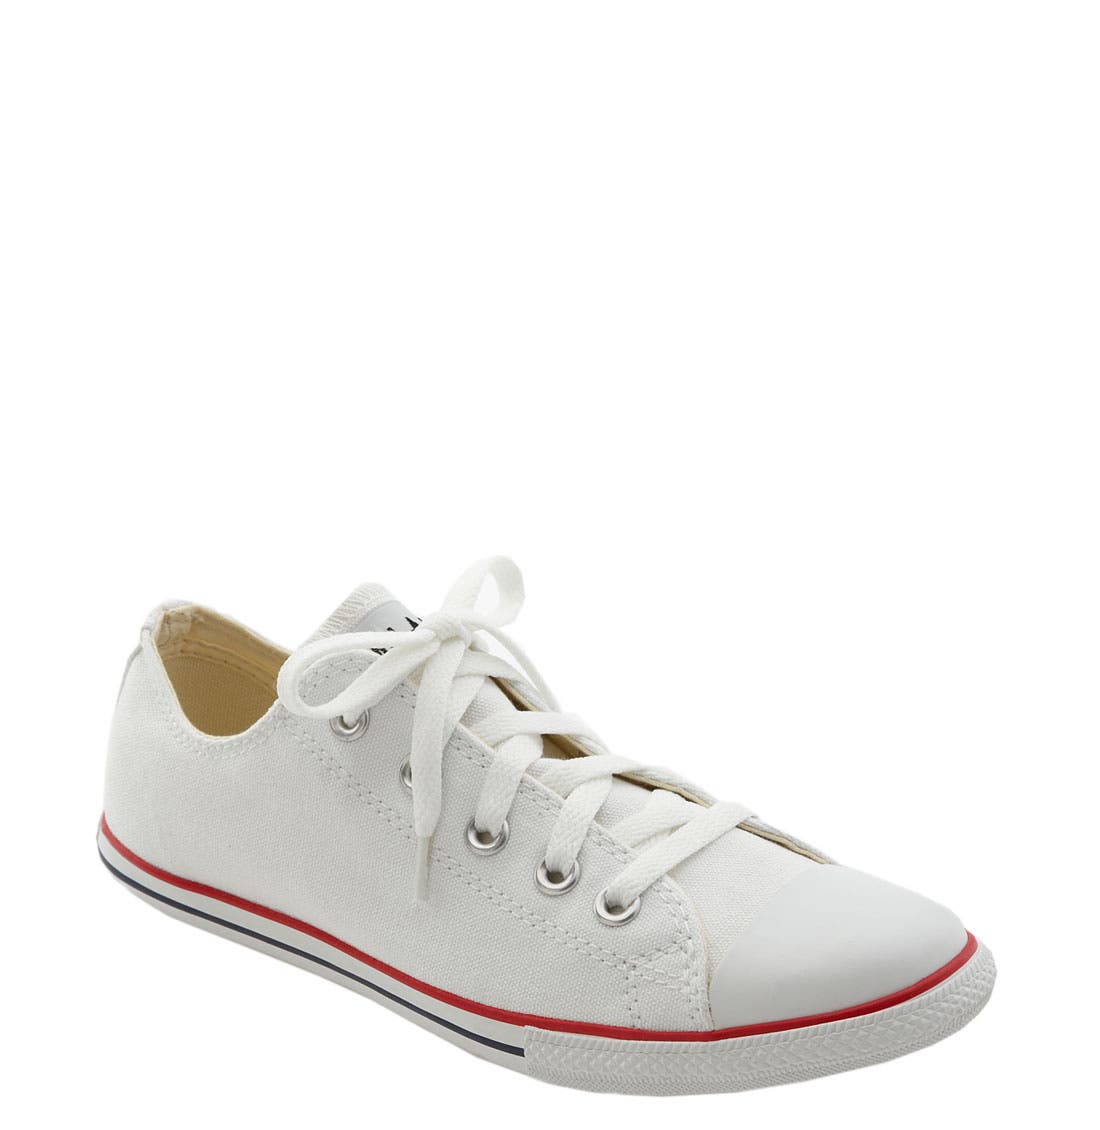 converse thin sole low top